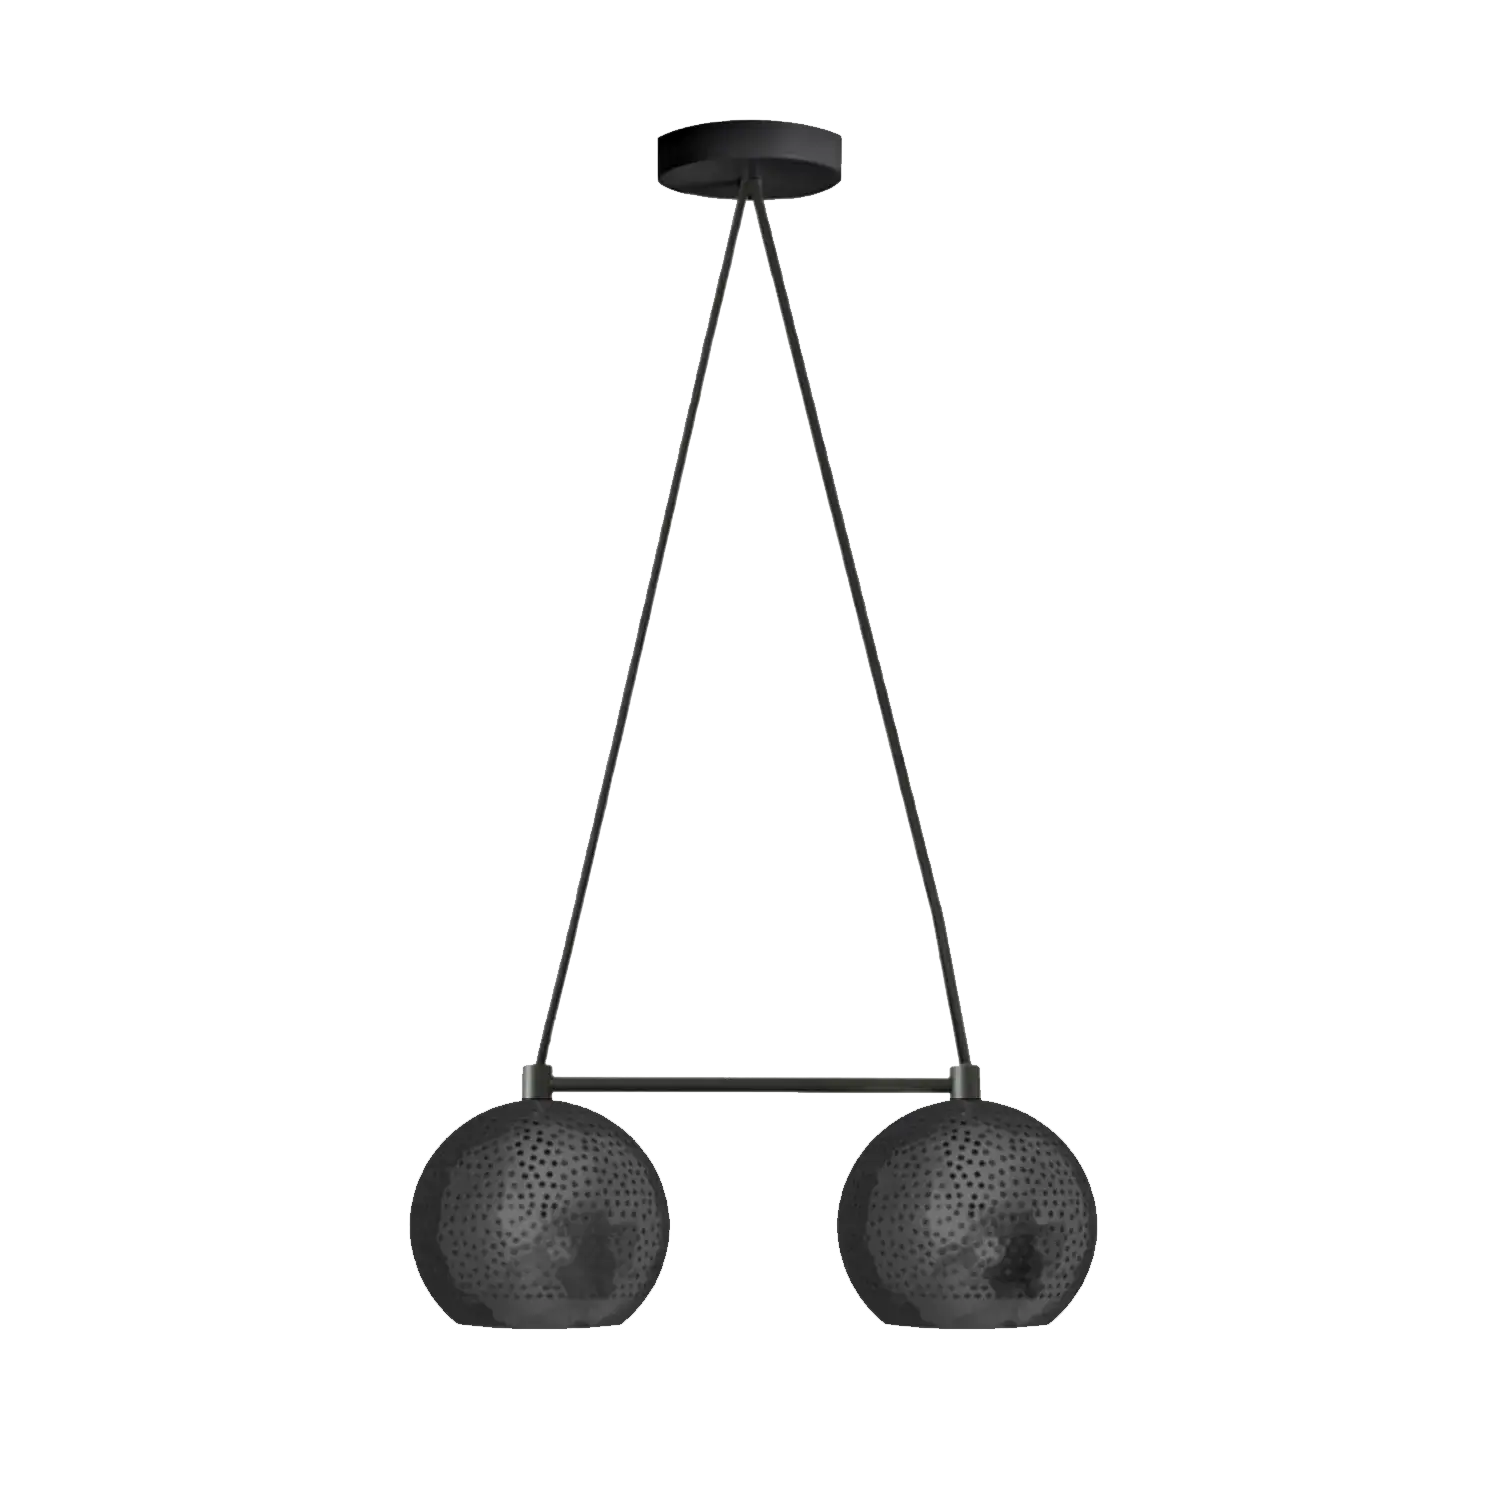 Dounia home Chandelier in black made of Metal, Model: Shams